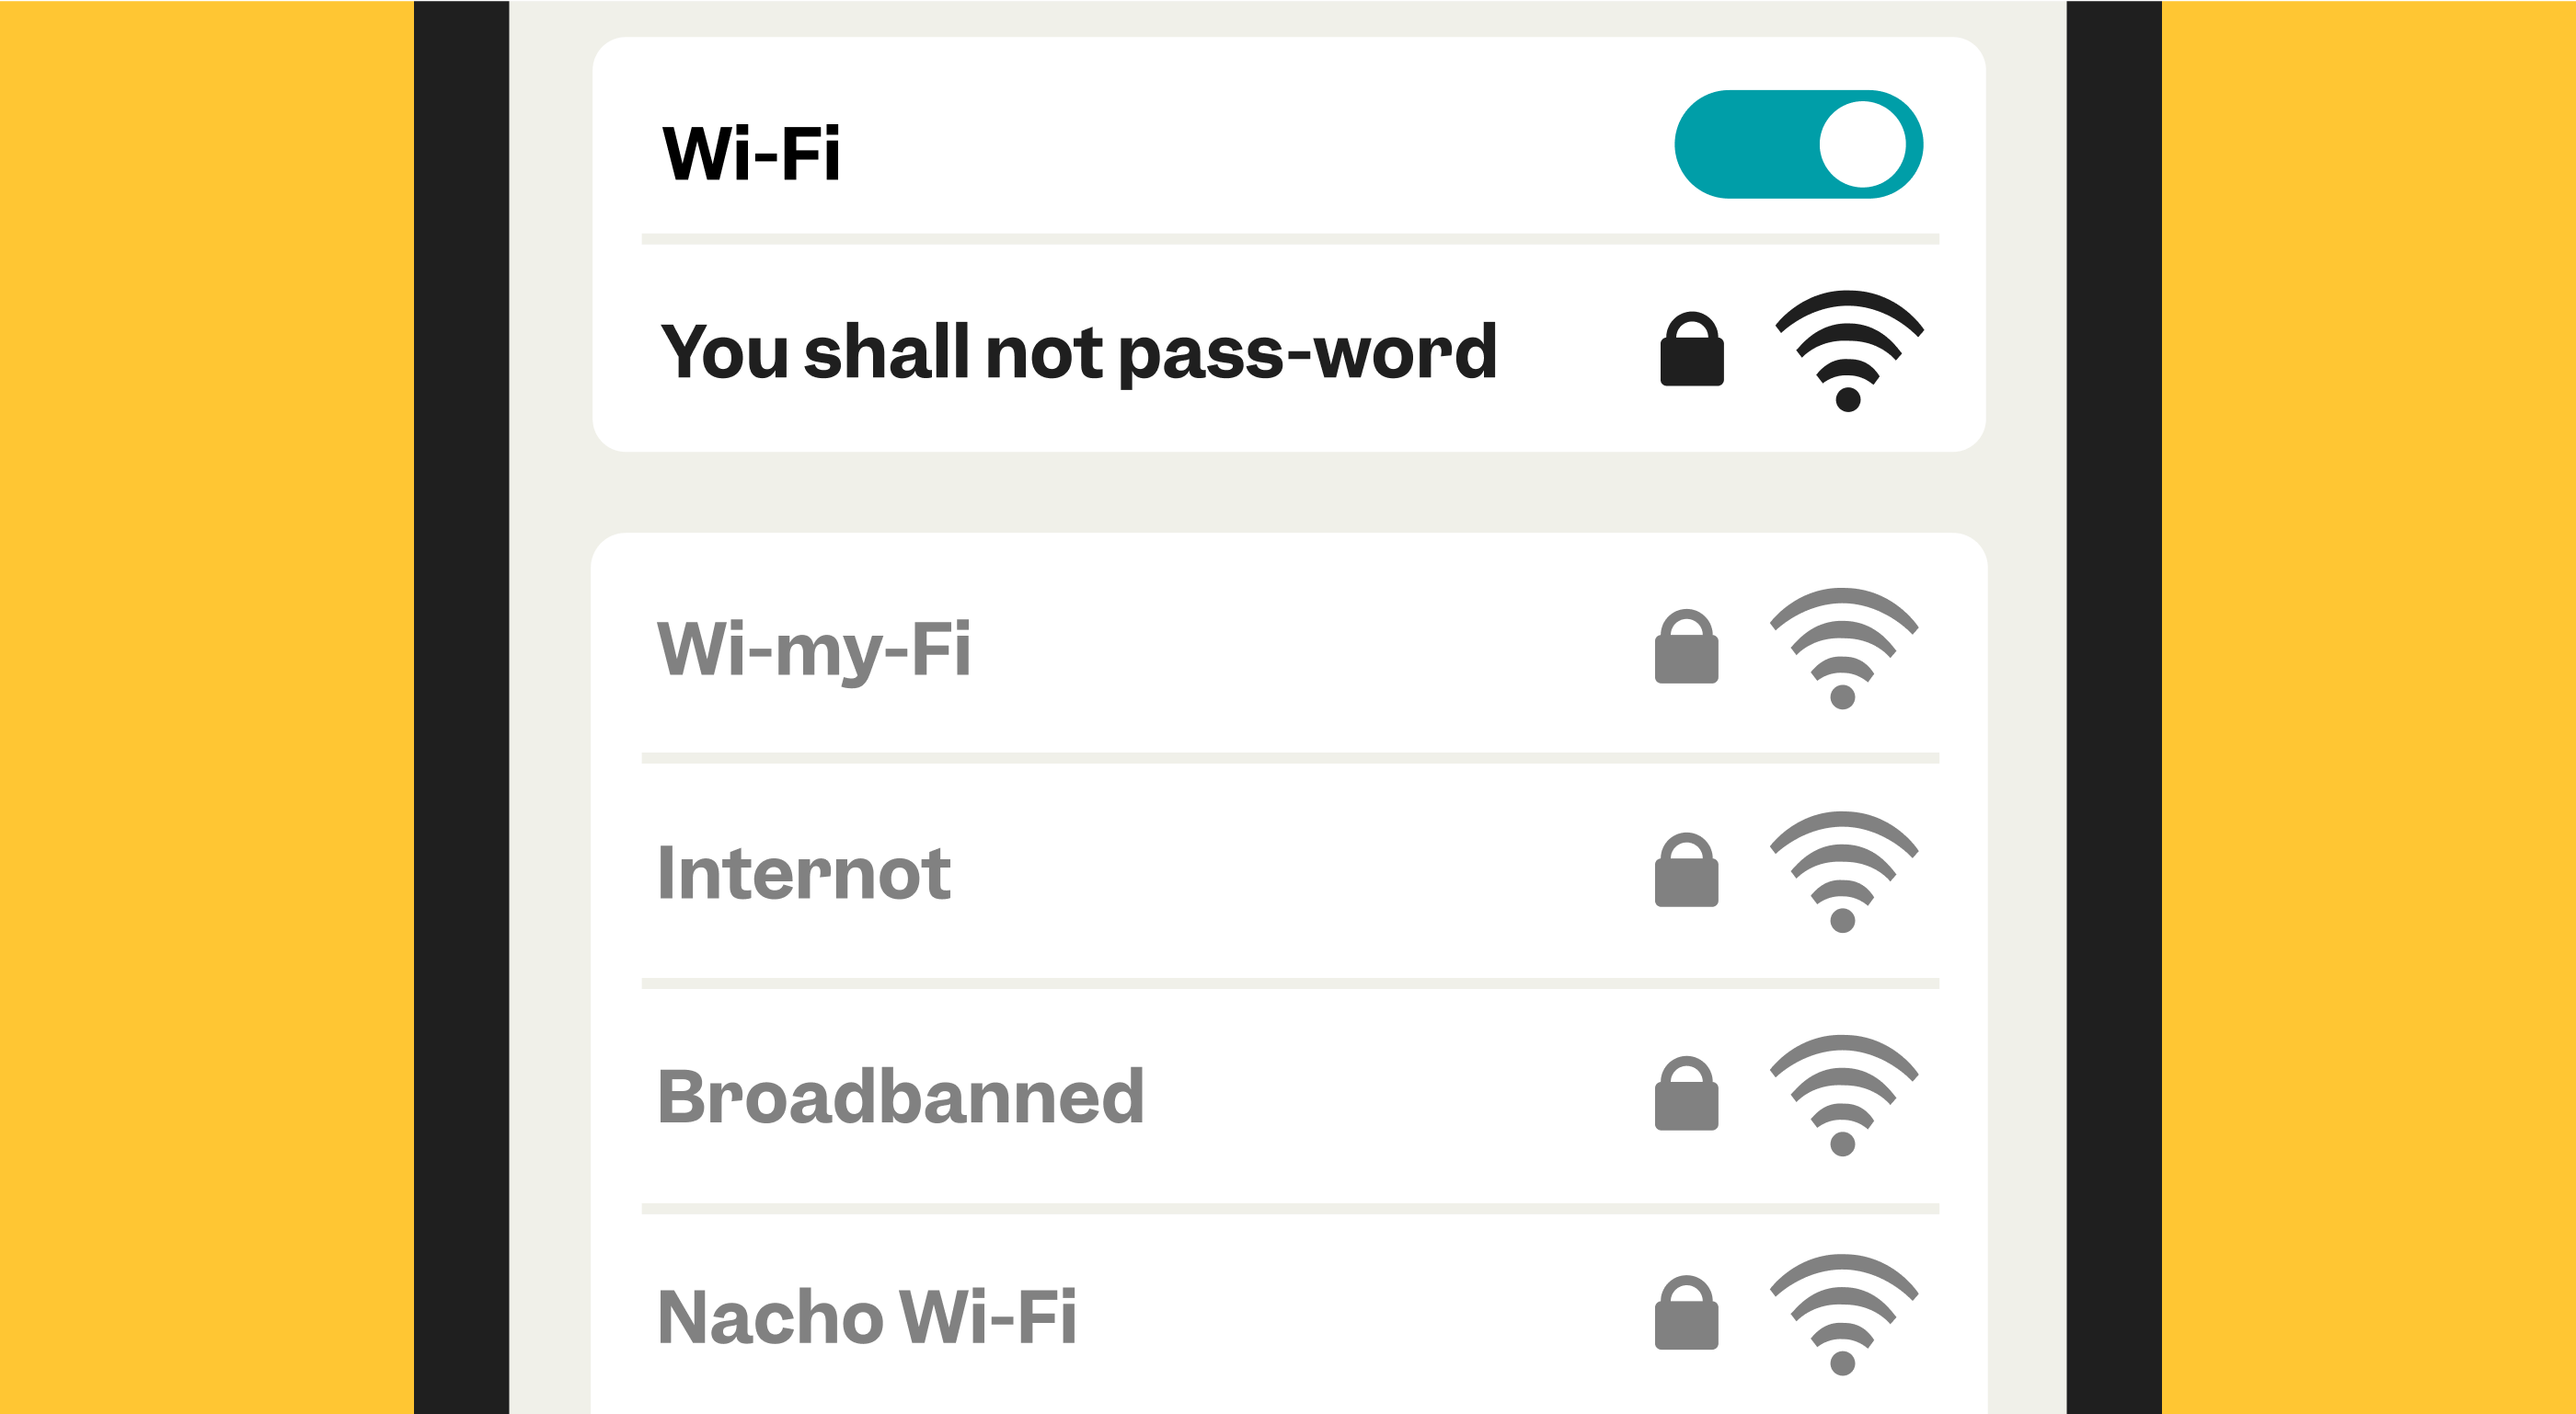 Mobile phone with wifi names "you shall no pass-word" and broadbanned